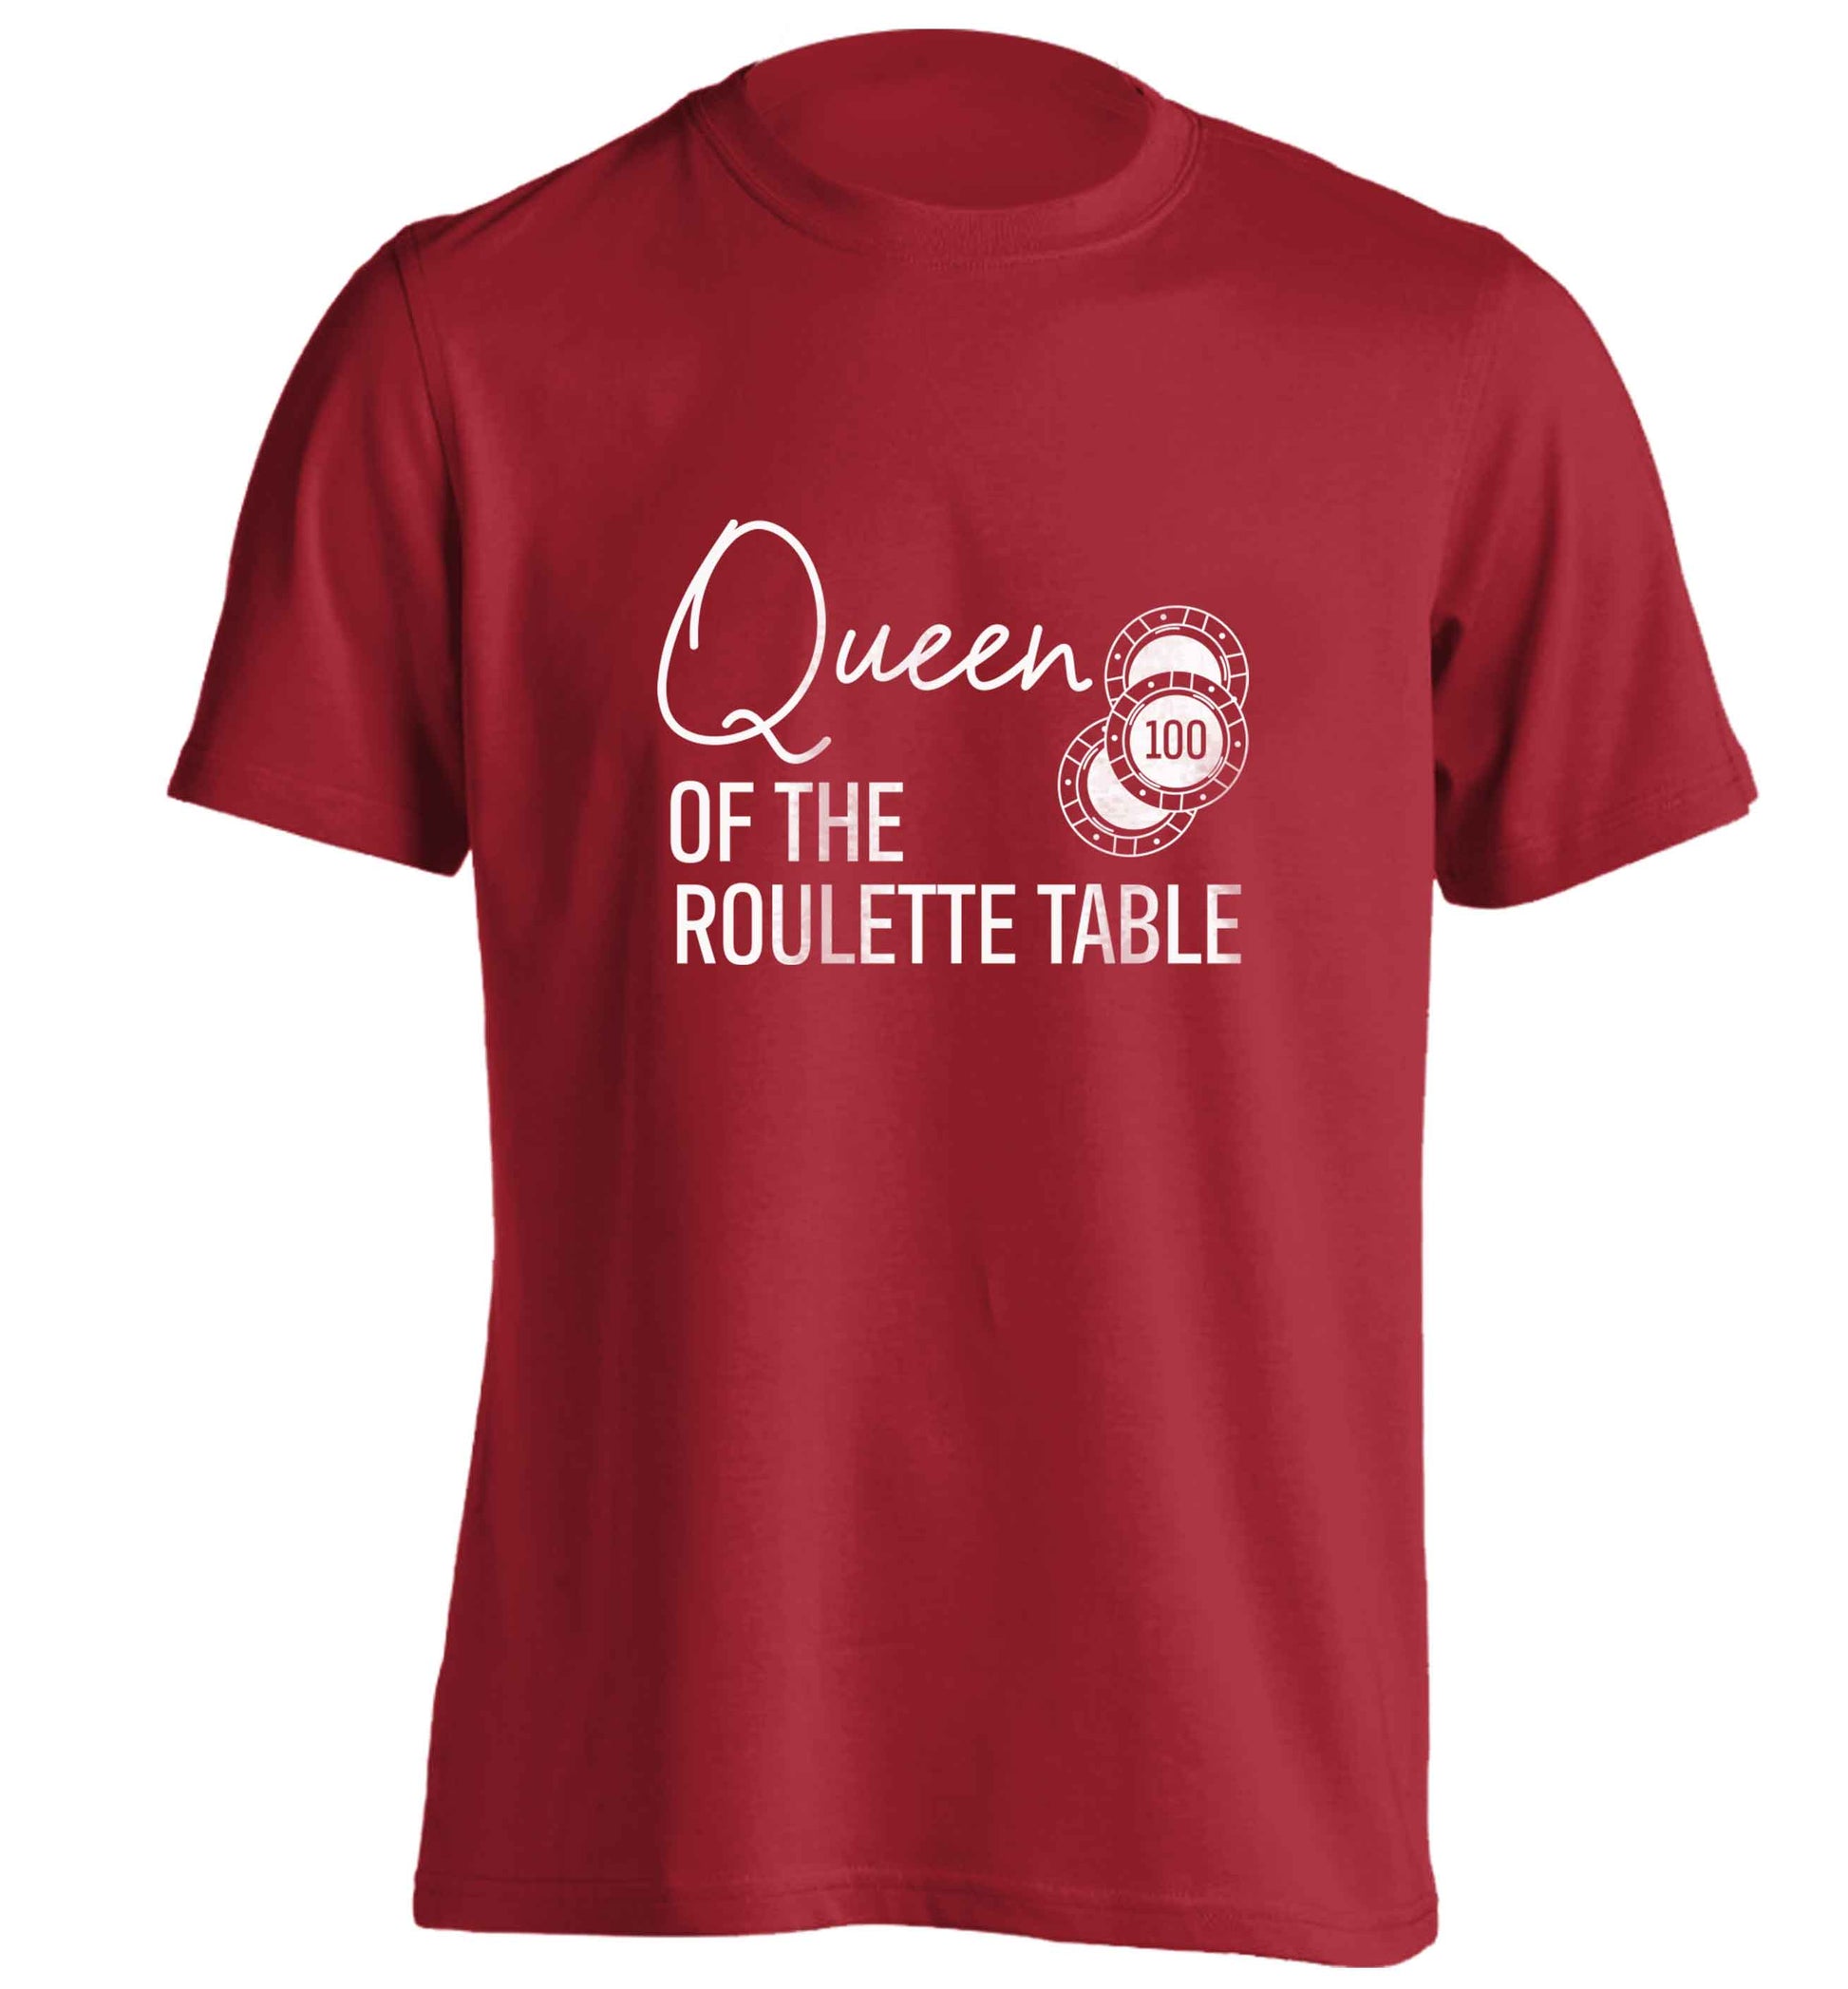 Queen of the roulette table adults unisex red Tshirt 2XL